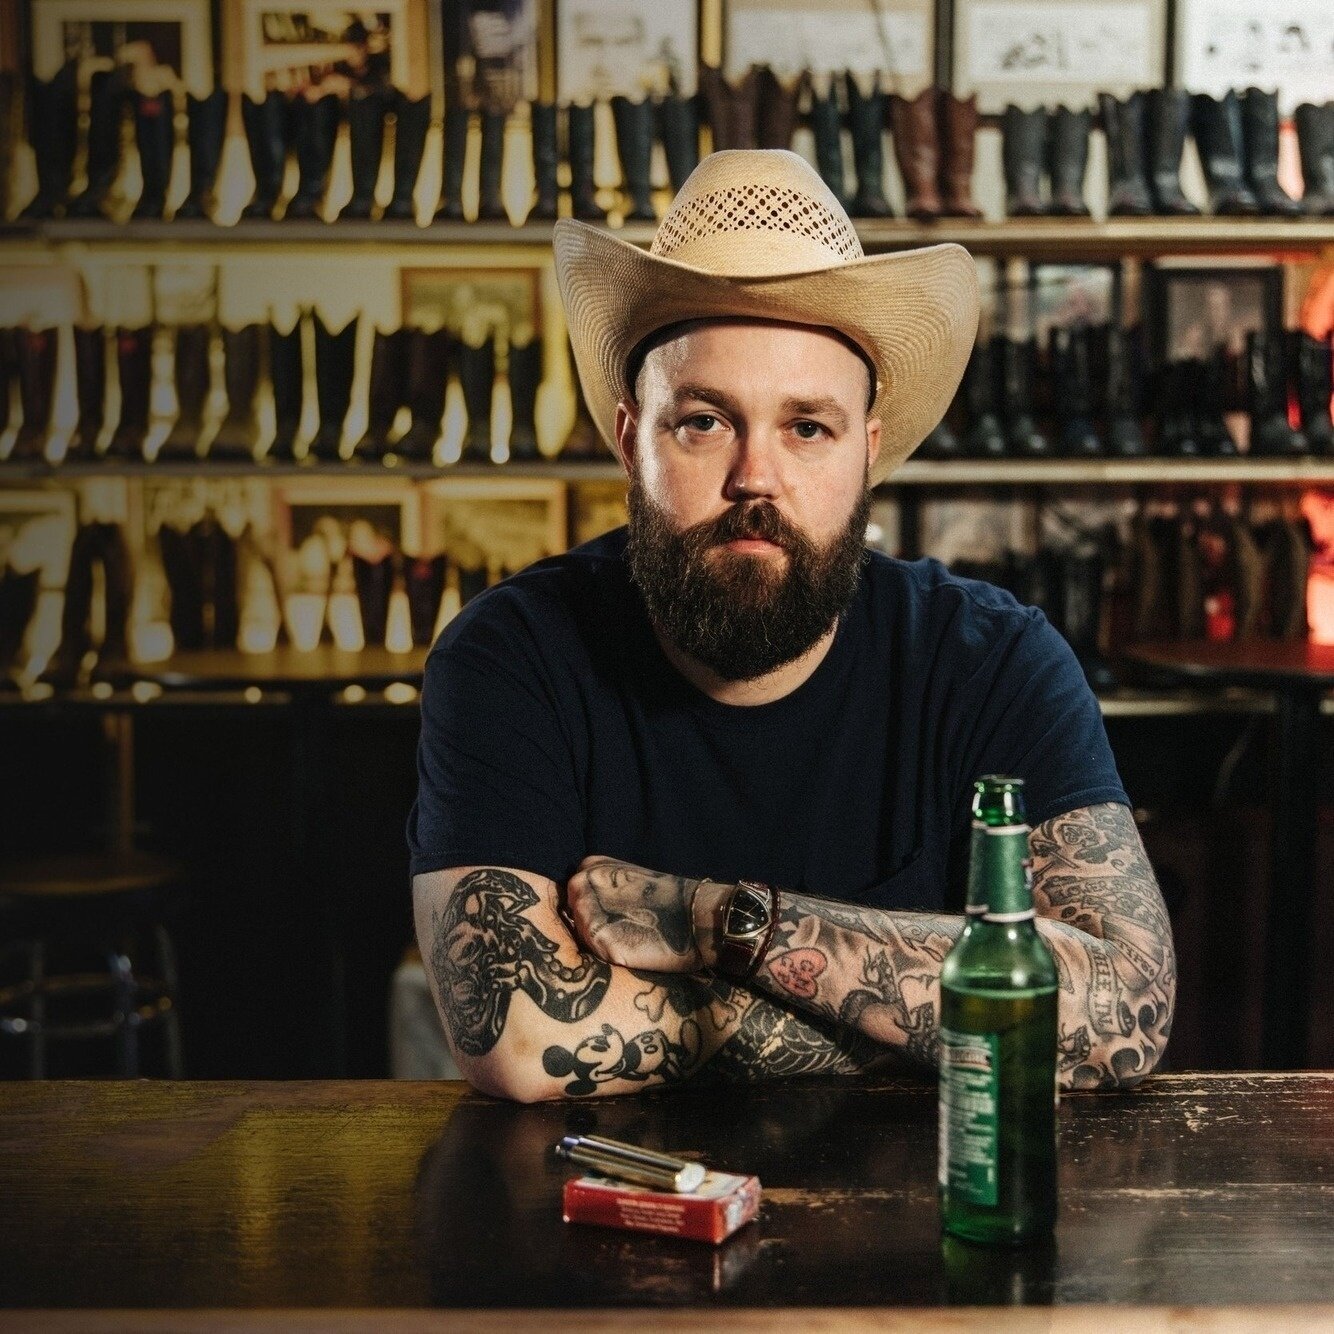 Have you got your tickets to The George Street Hoedown? This Friday you could be sipping cold beers and Tennessee whiskey while listening to some good &lsquo;ol country music from Nashville&rsquo;s finest Joshua Hedley, you should probably dust off y